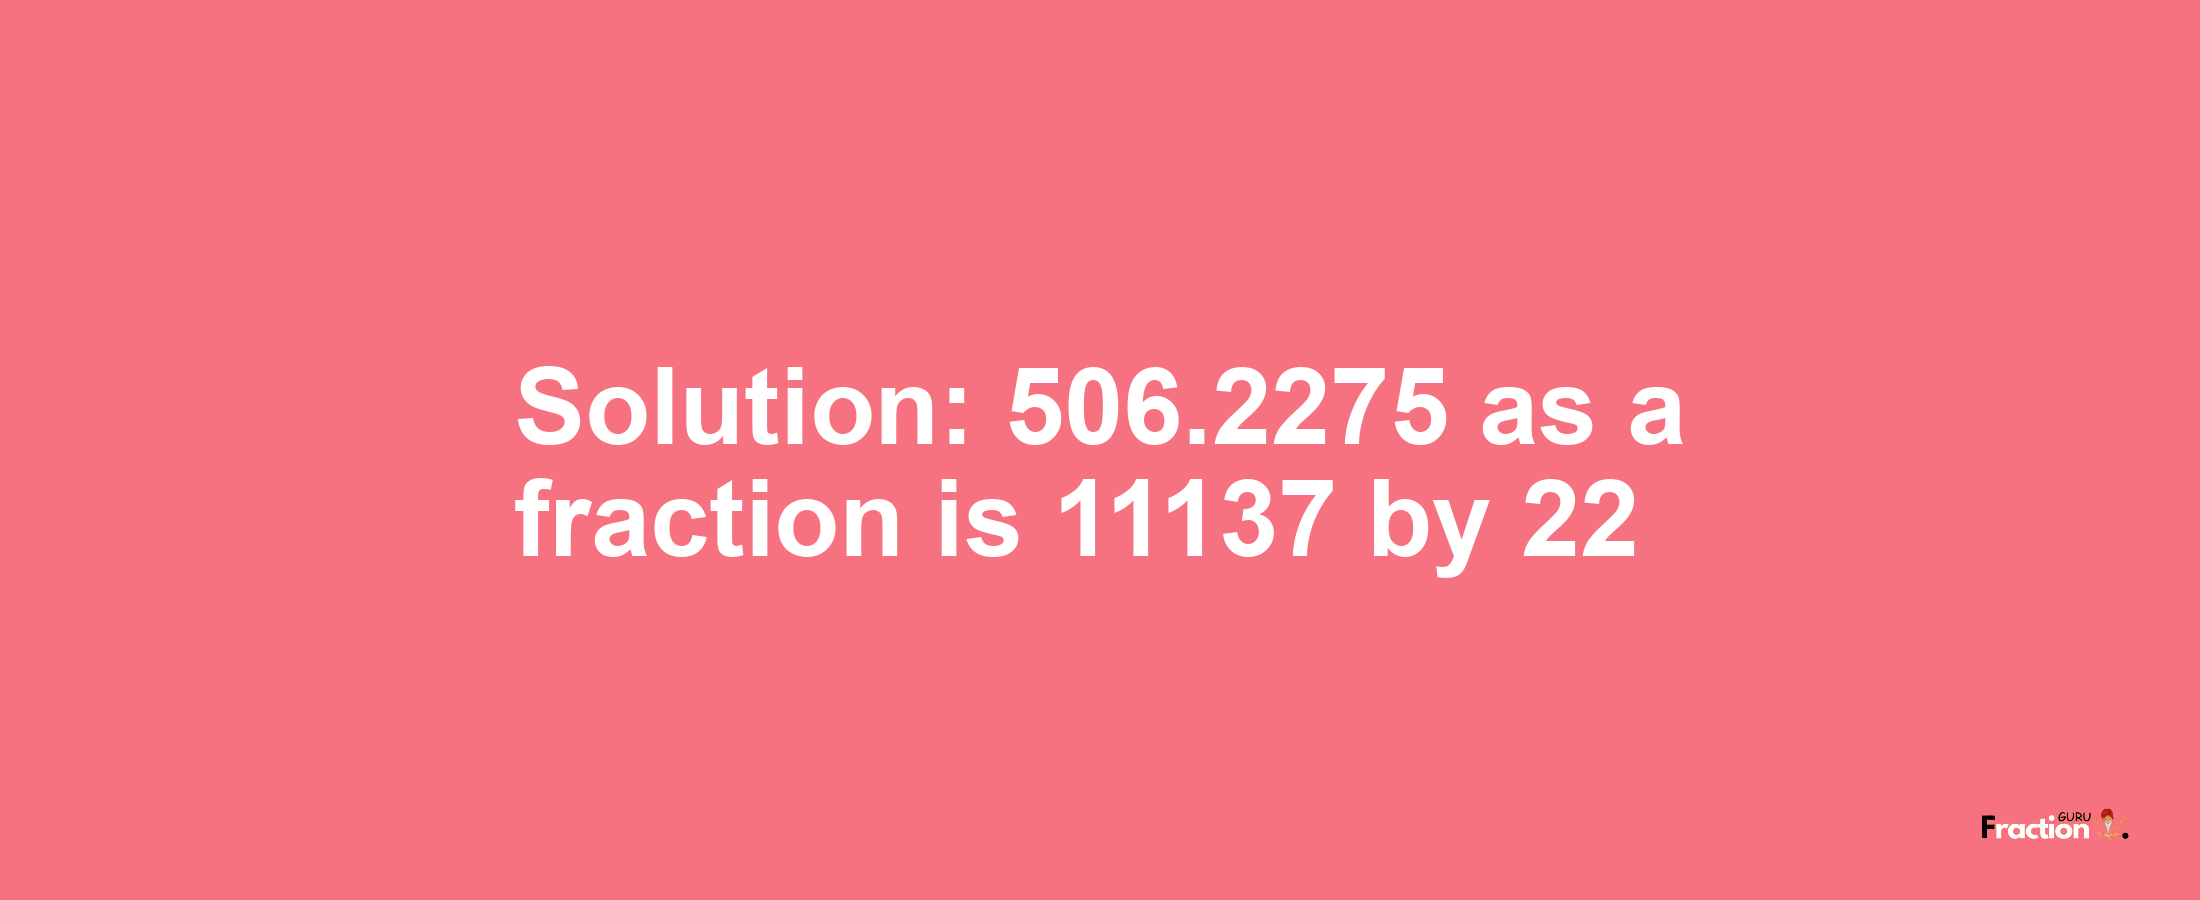 Solution:506.2275 as a fraction is 11137/22